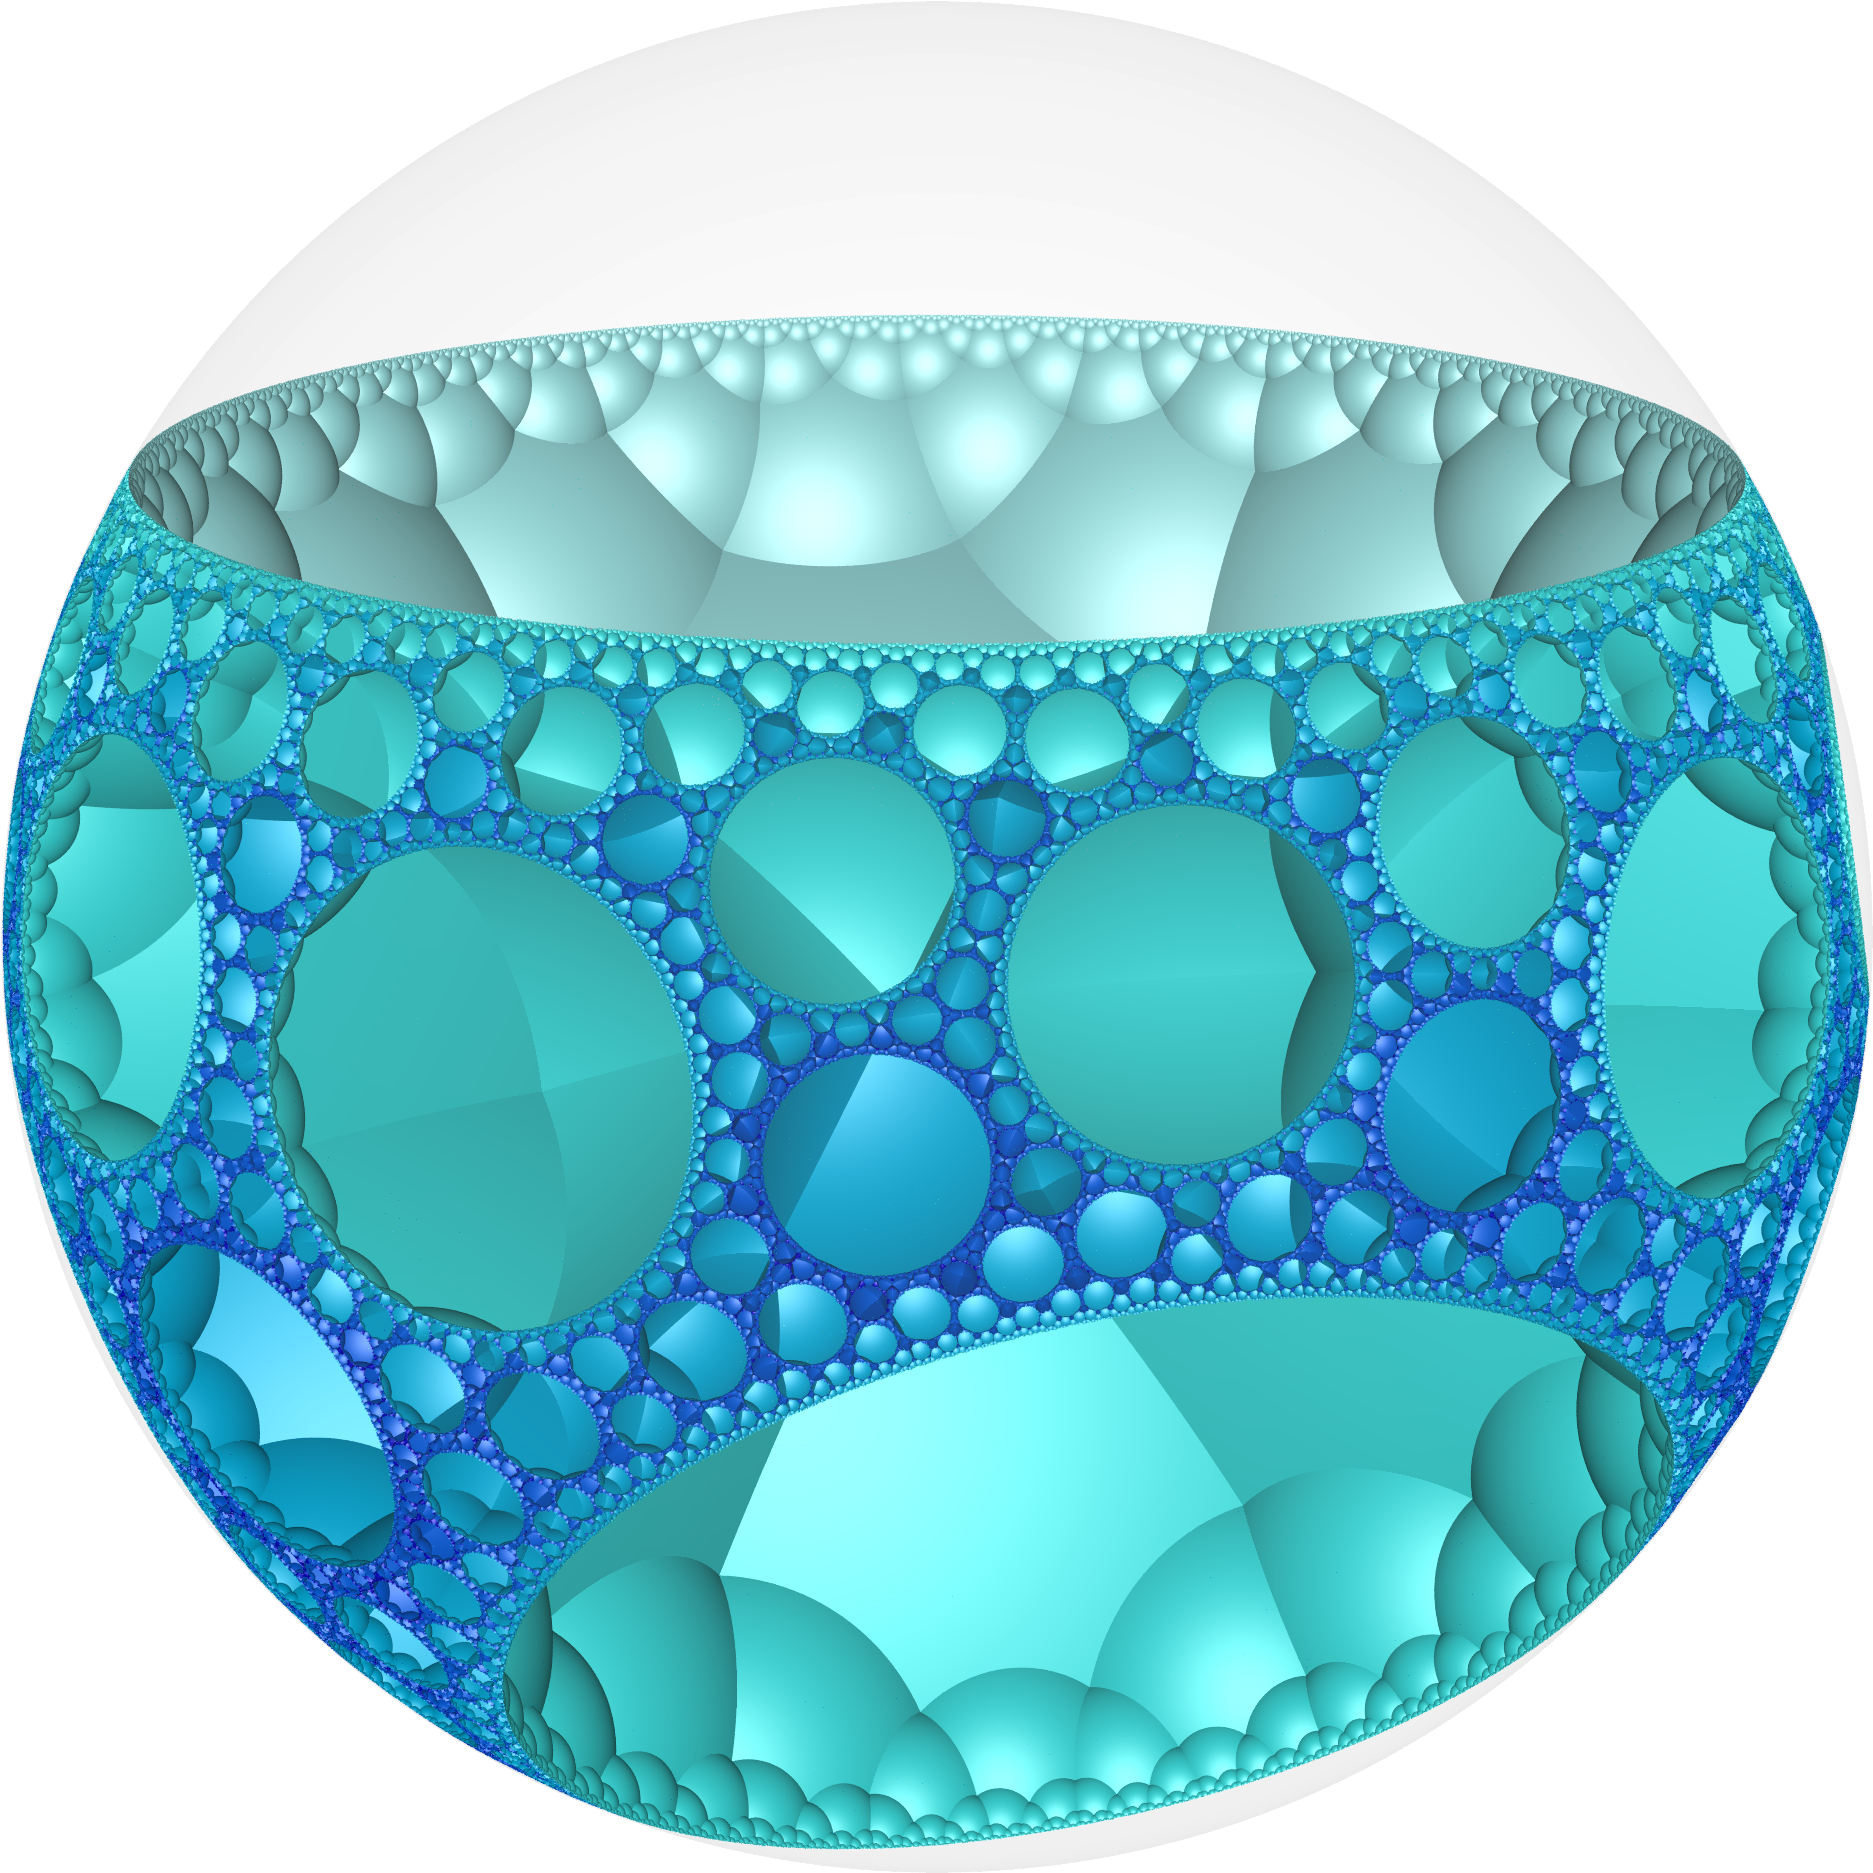 A Blue And White Bubbled Object